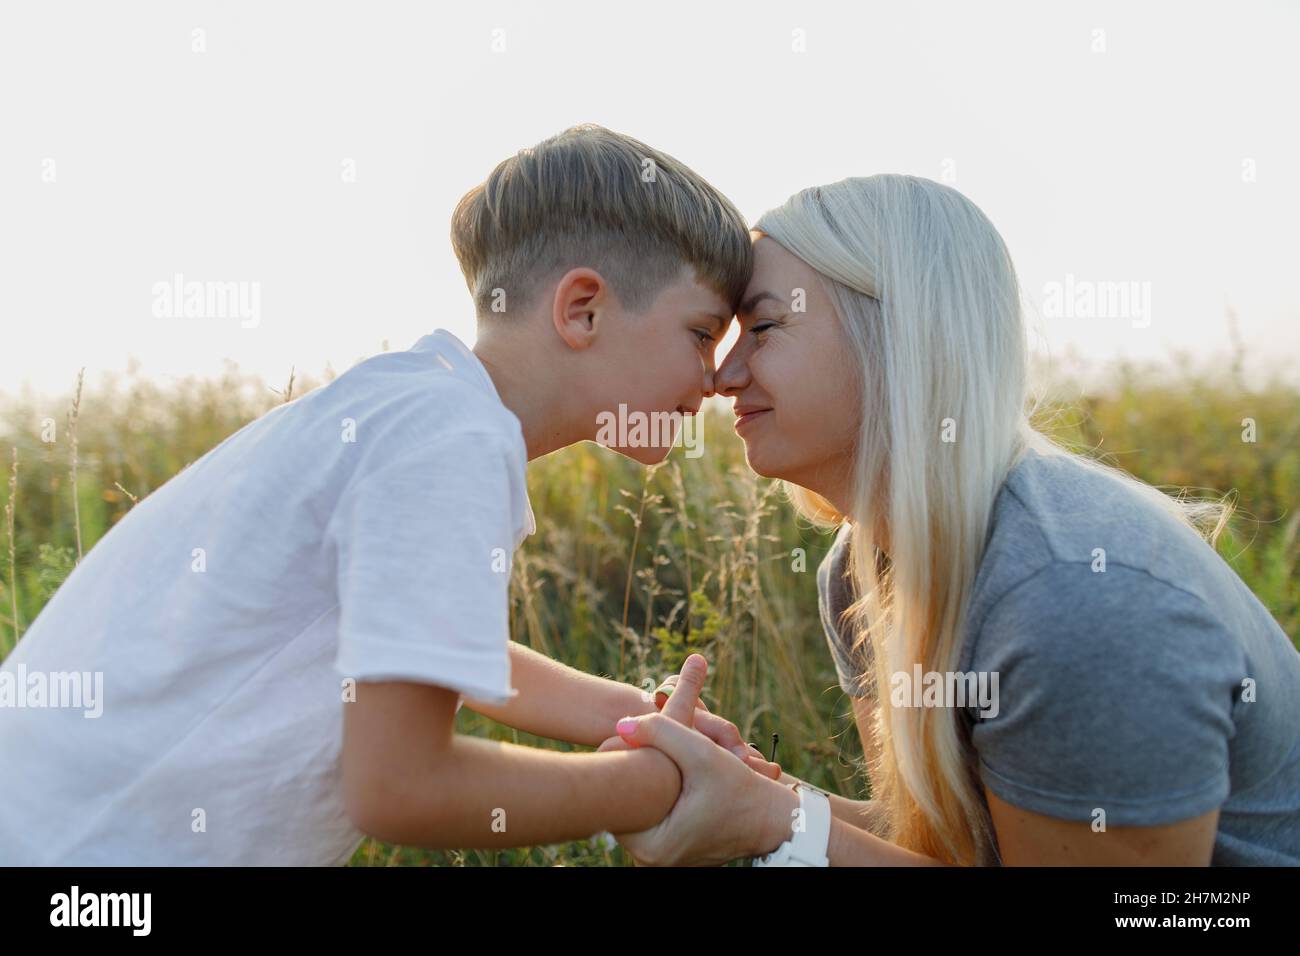 Mother and son face to face holding hands at meadow Stock Photo